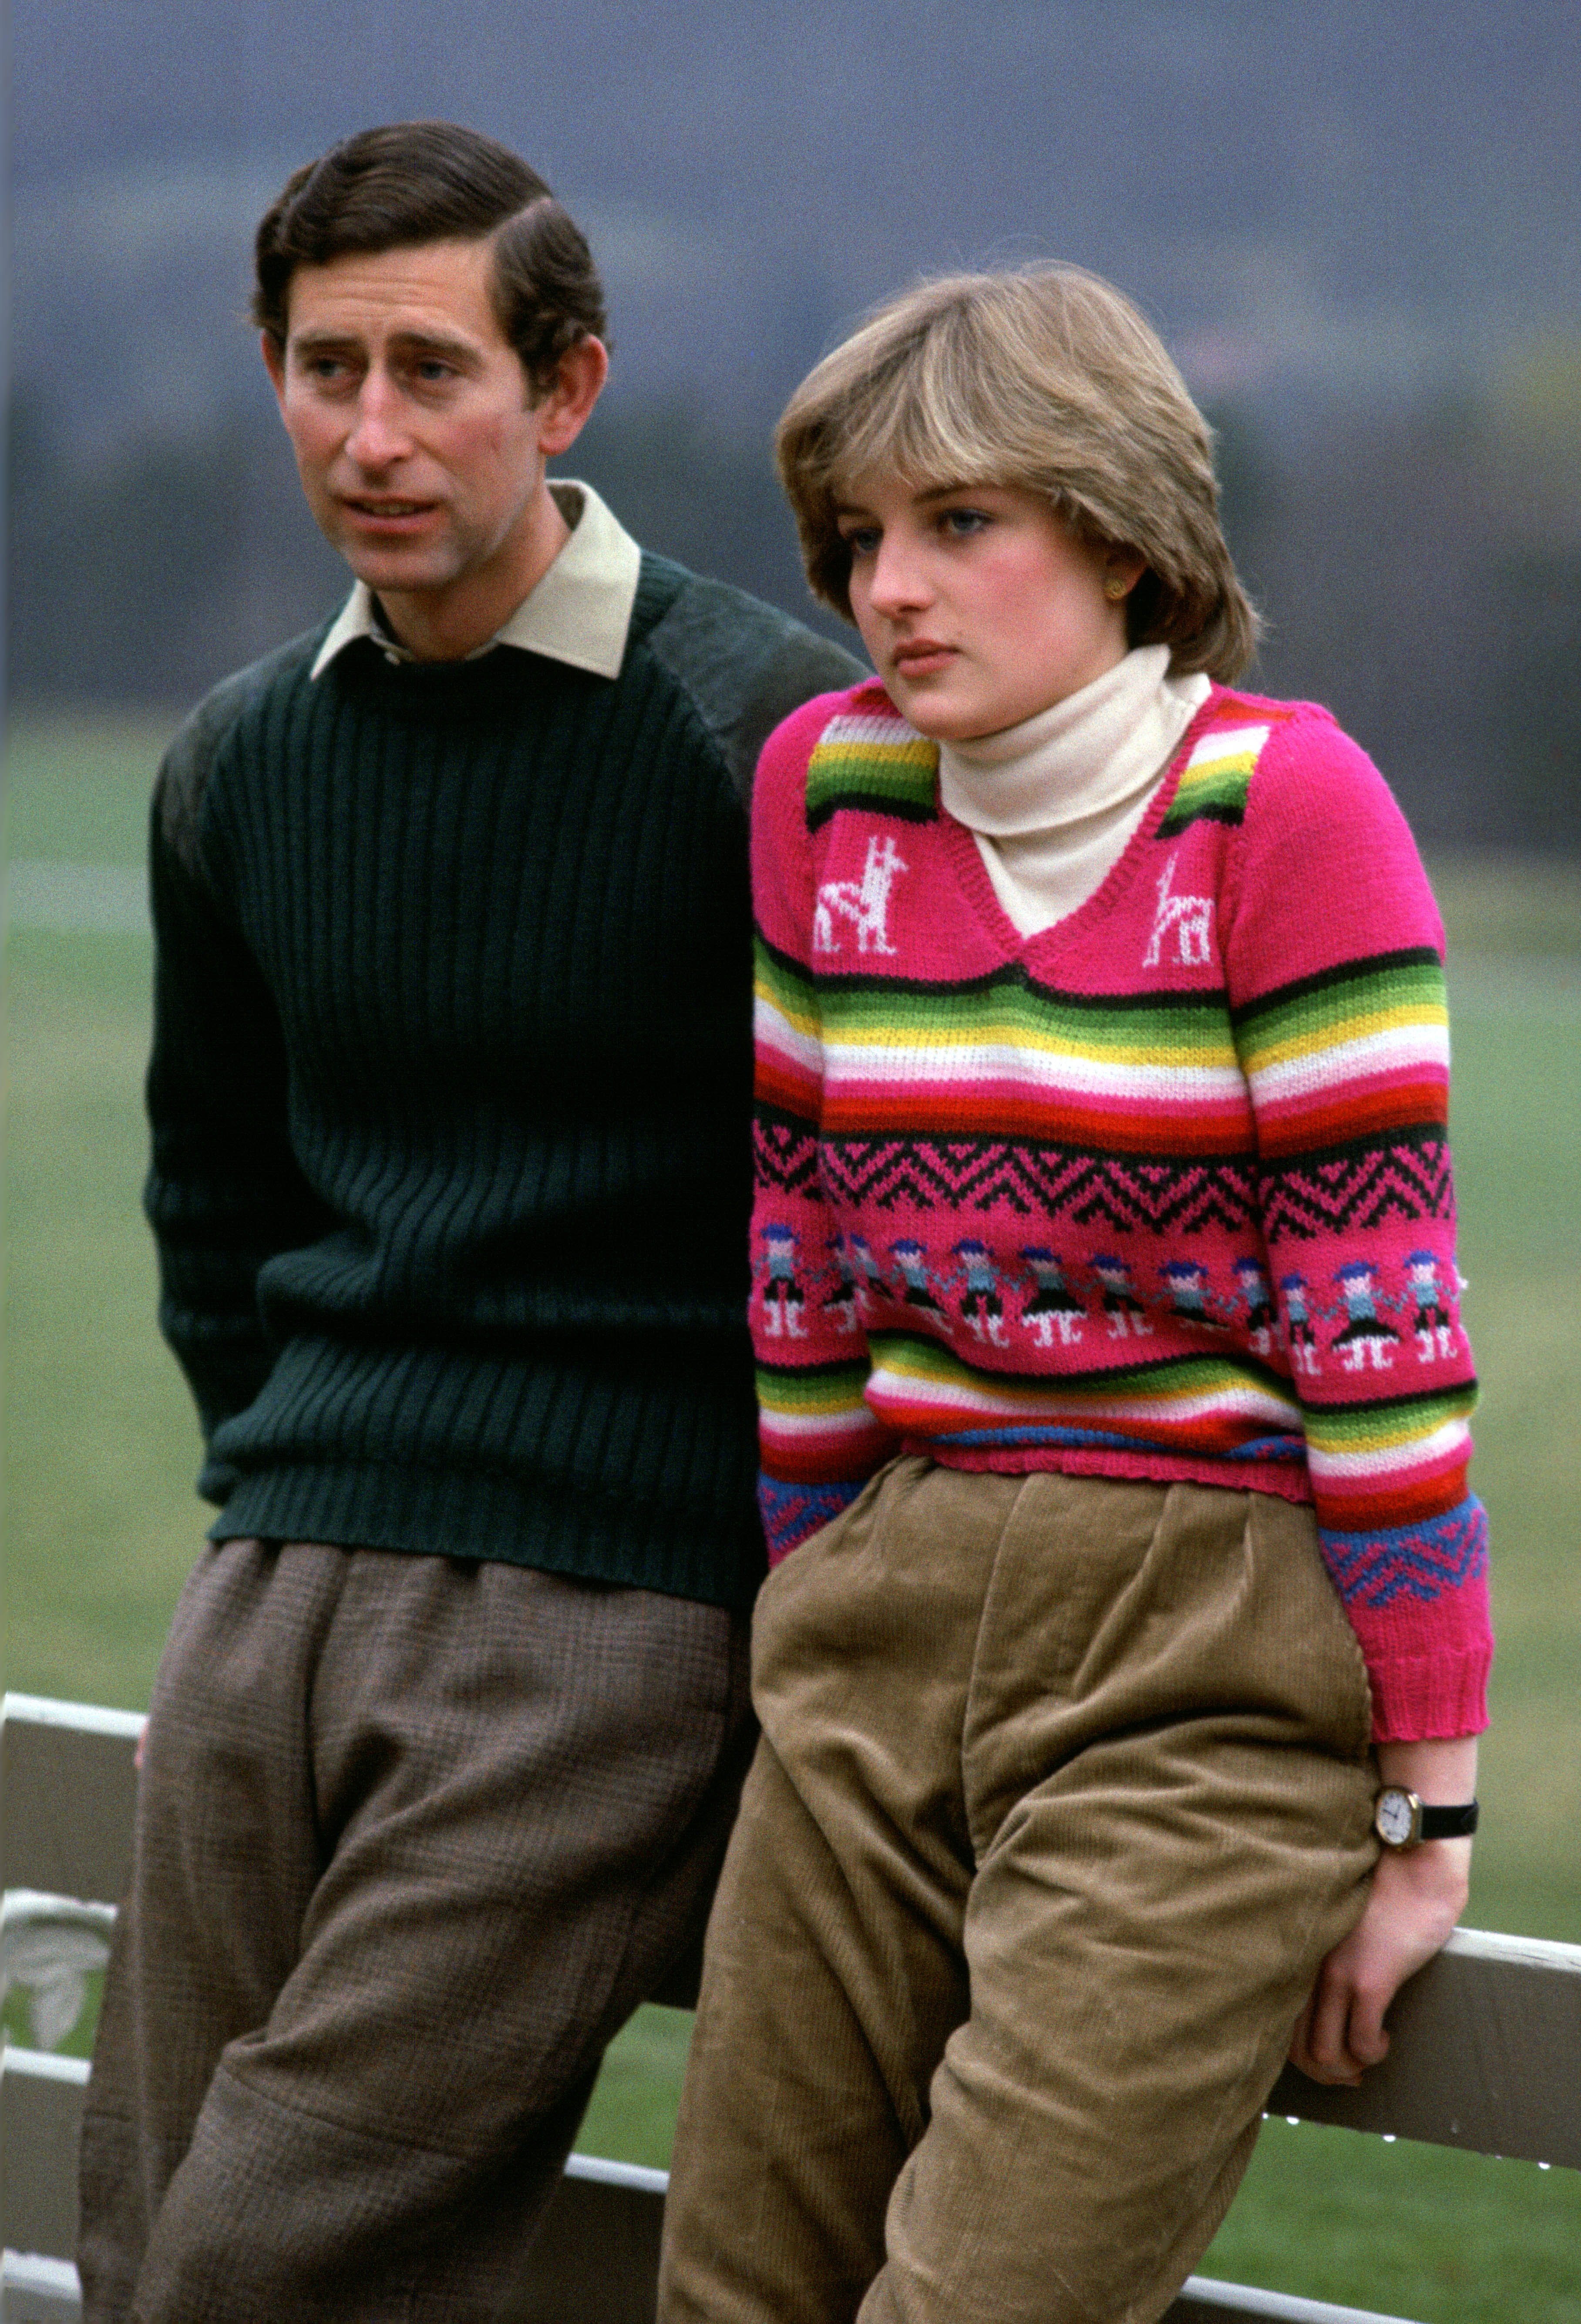 Prince Charles and Lady Diana Spencer during a photocall before their wedding while staying at Craigowan Lodge on the Balmoral Estate in Scotland on May 6, 1981 | Source: Getty Images